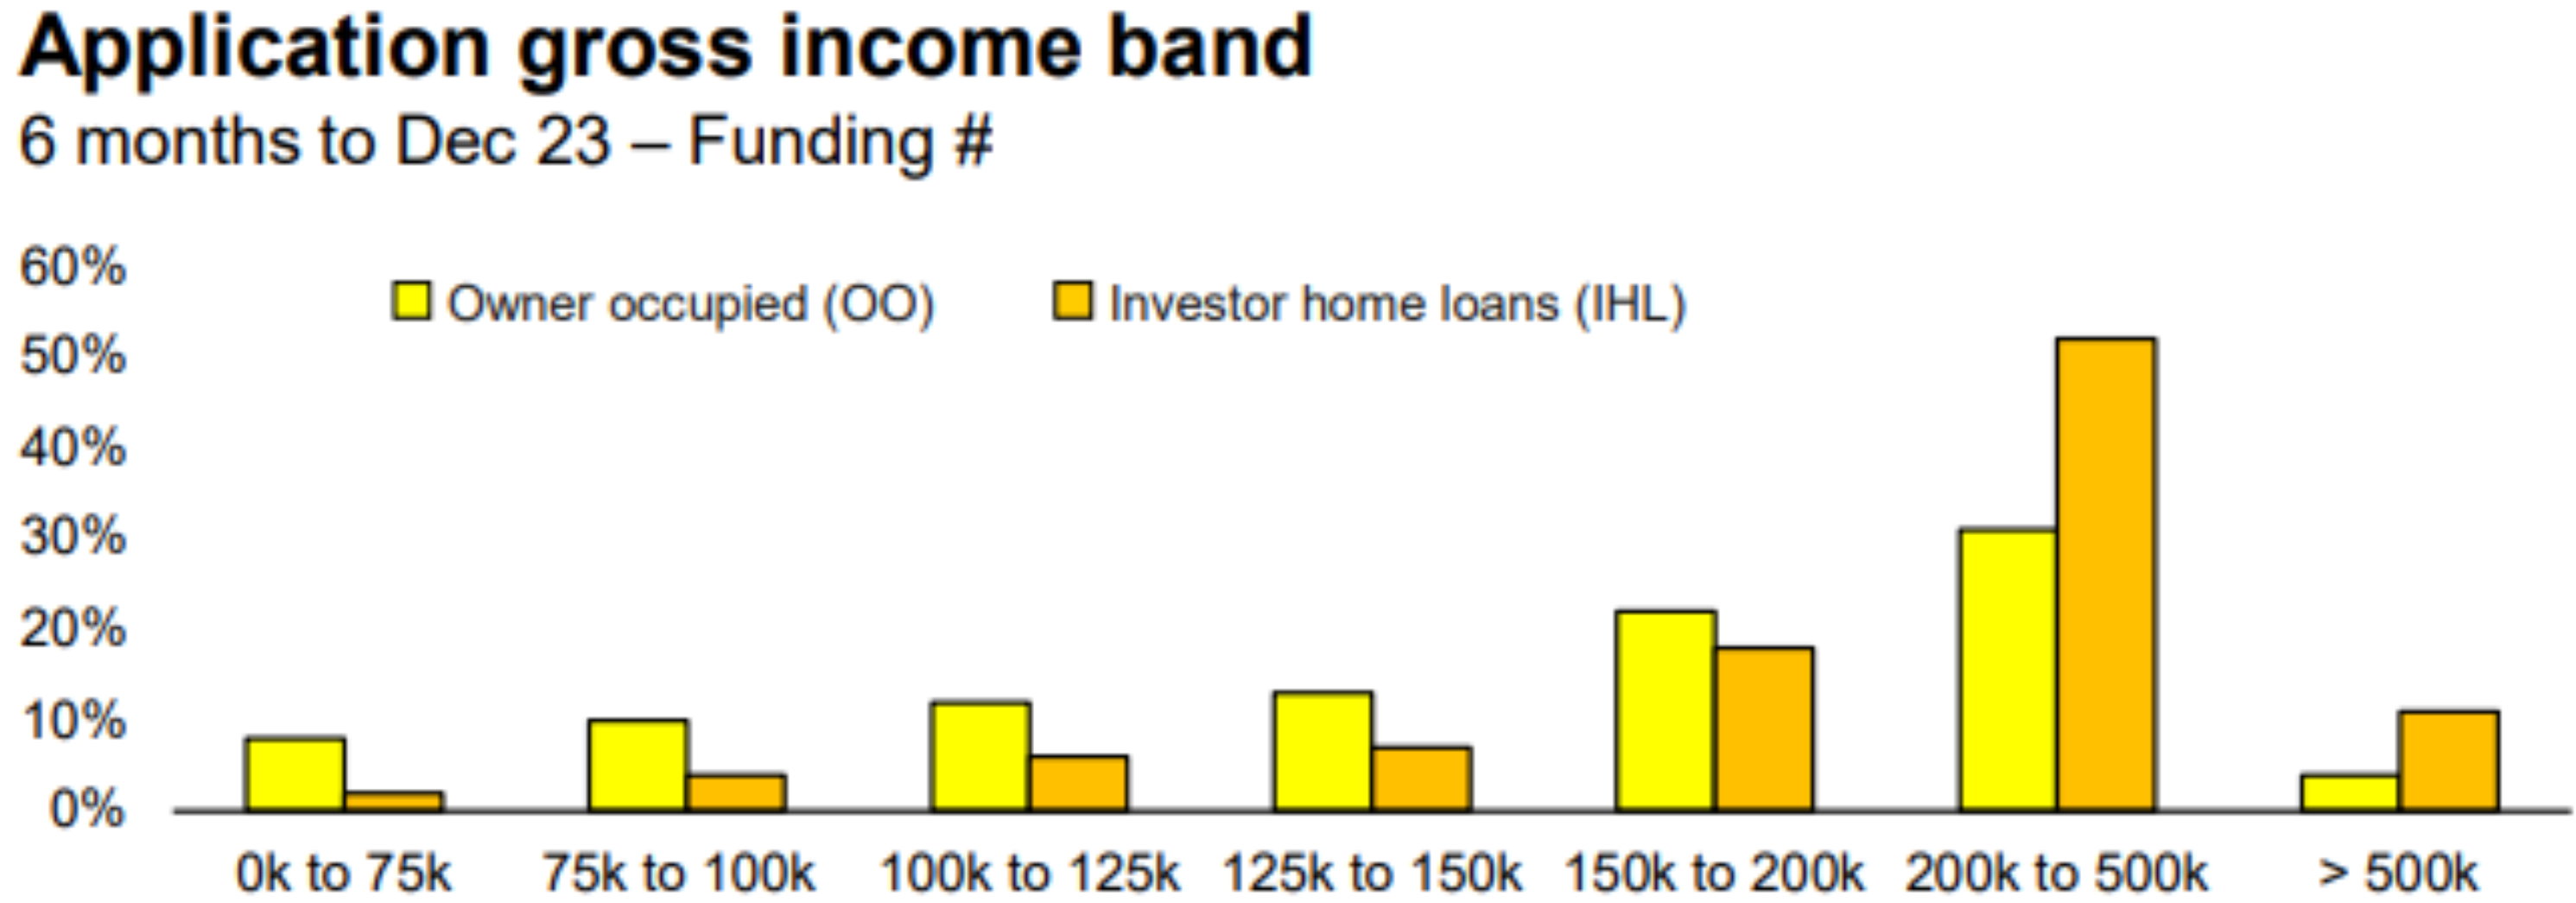 Mortgage applications by income band